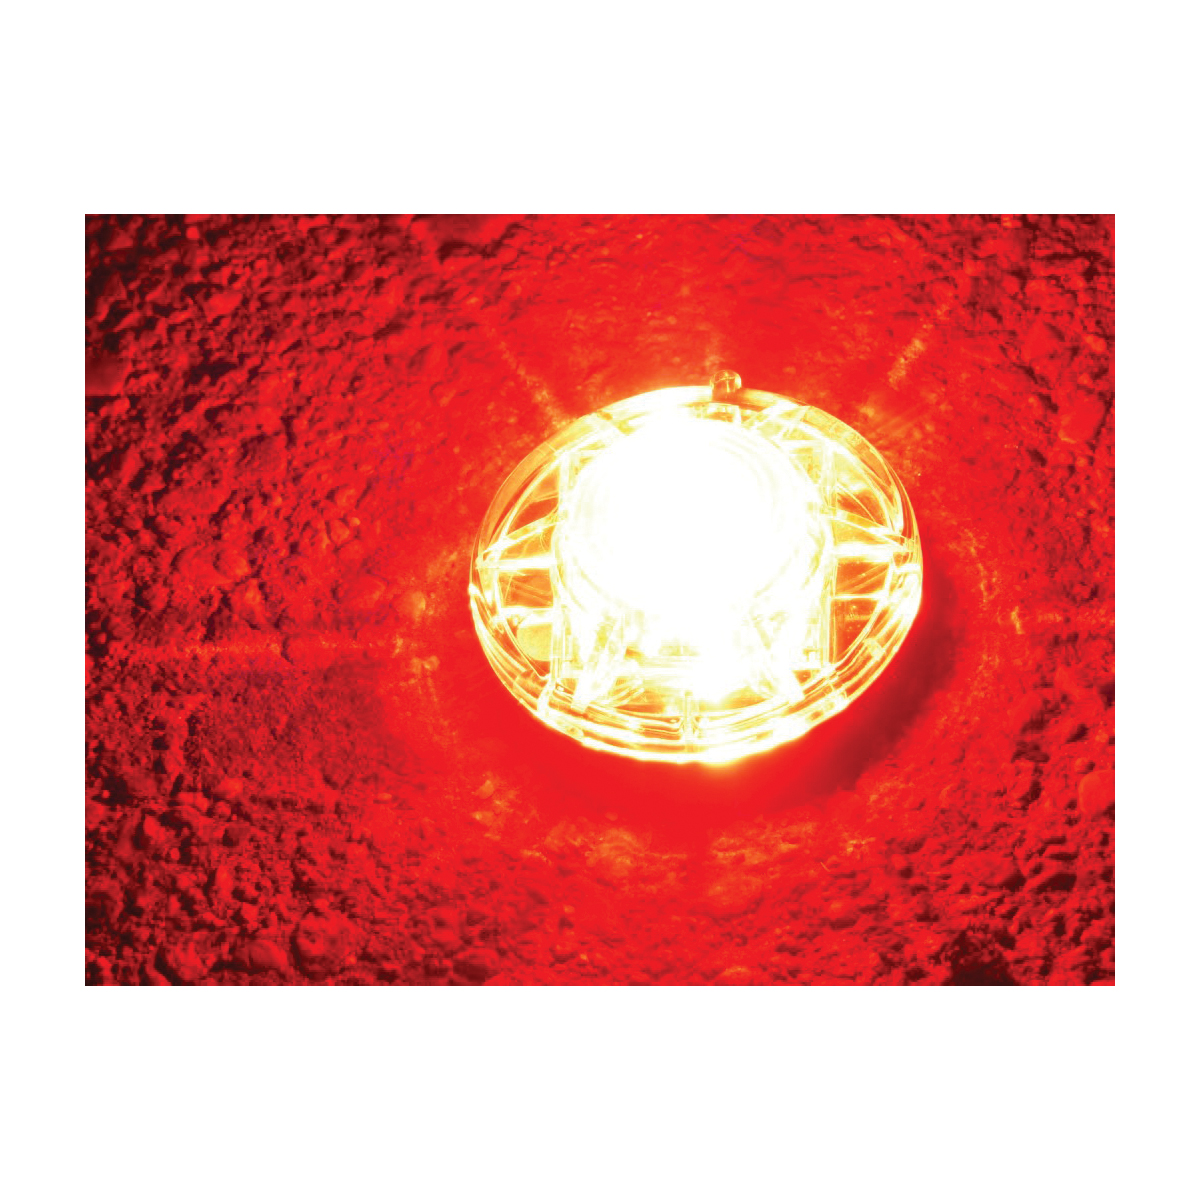 STONEPOINT LED LIGHTING EB1-R Emergency Beacon, Red - 2